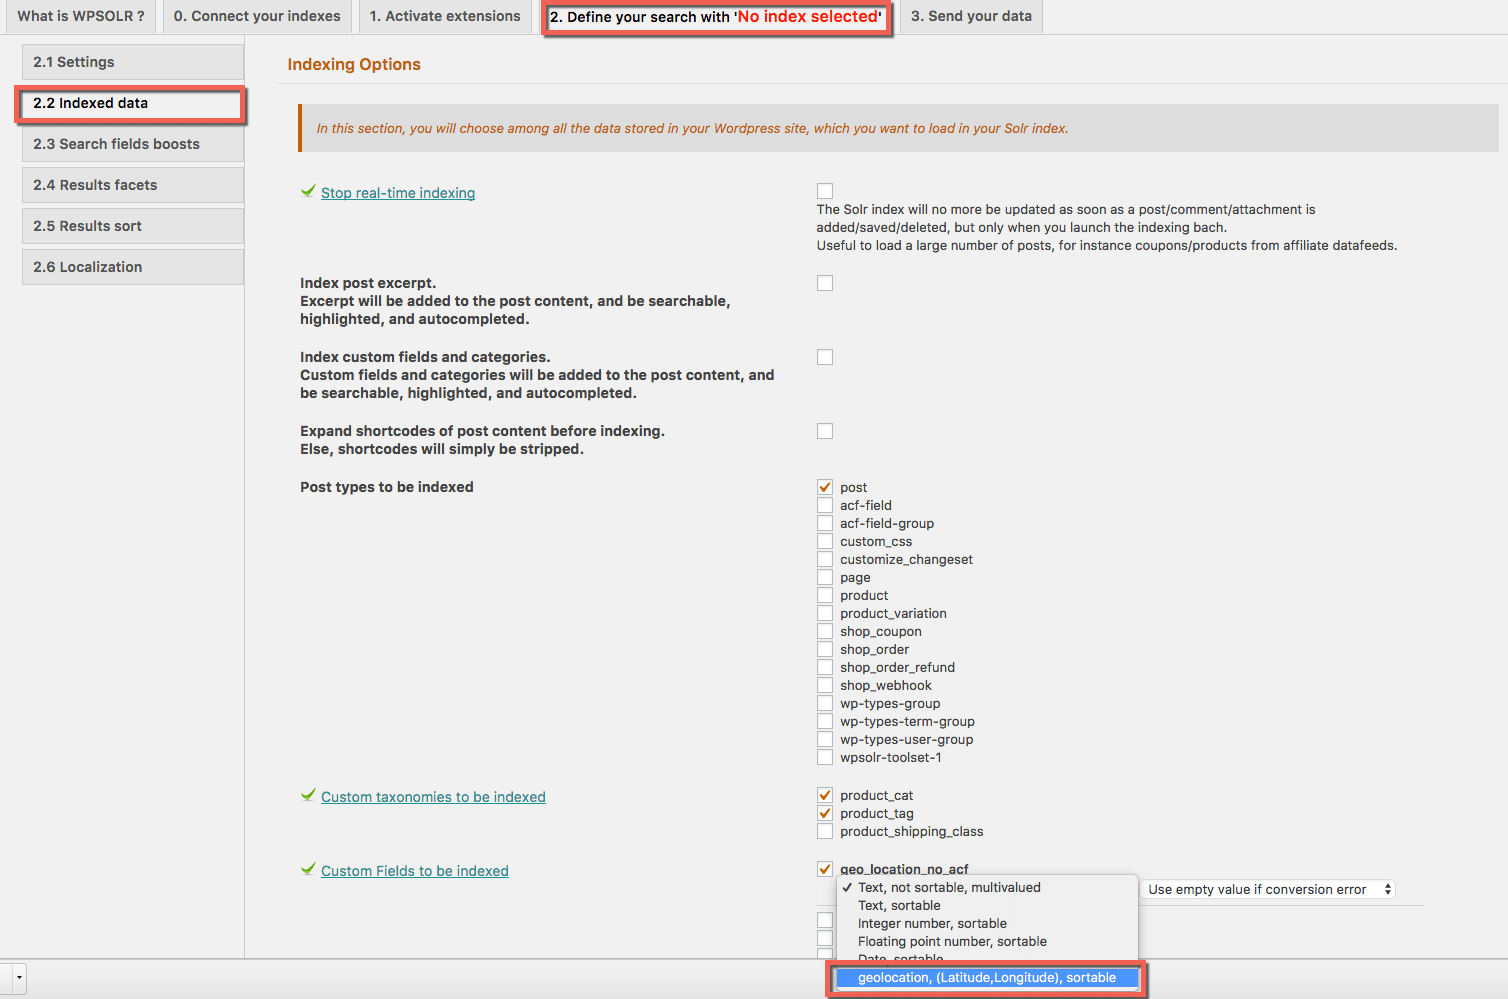 Select a 'Geolocation' type for your custom fields containing 'lat,long' data